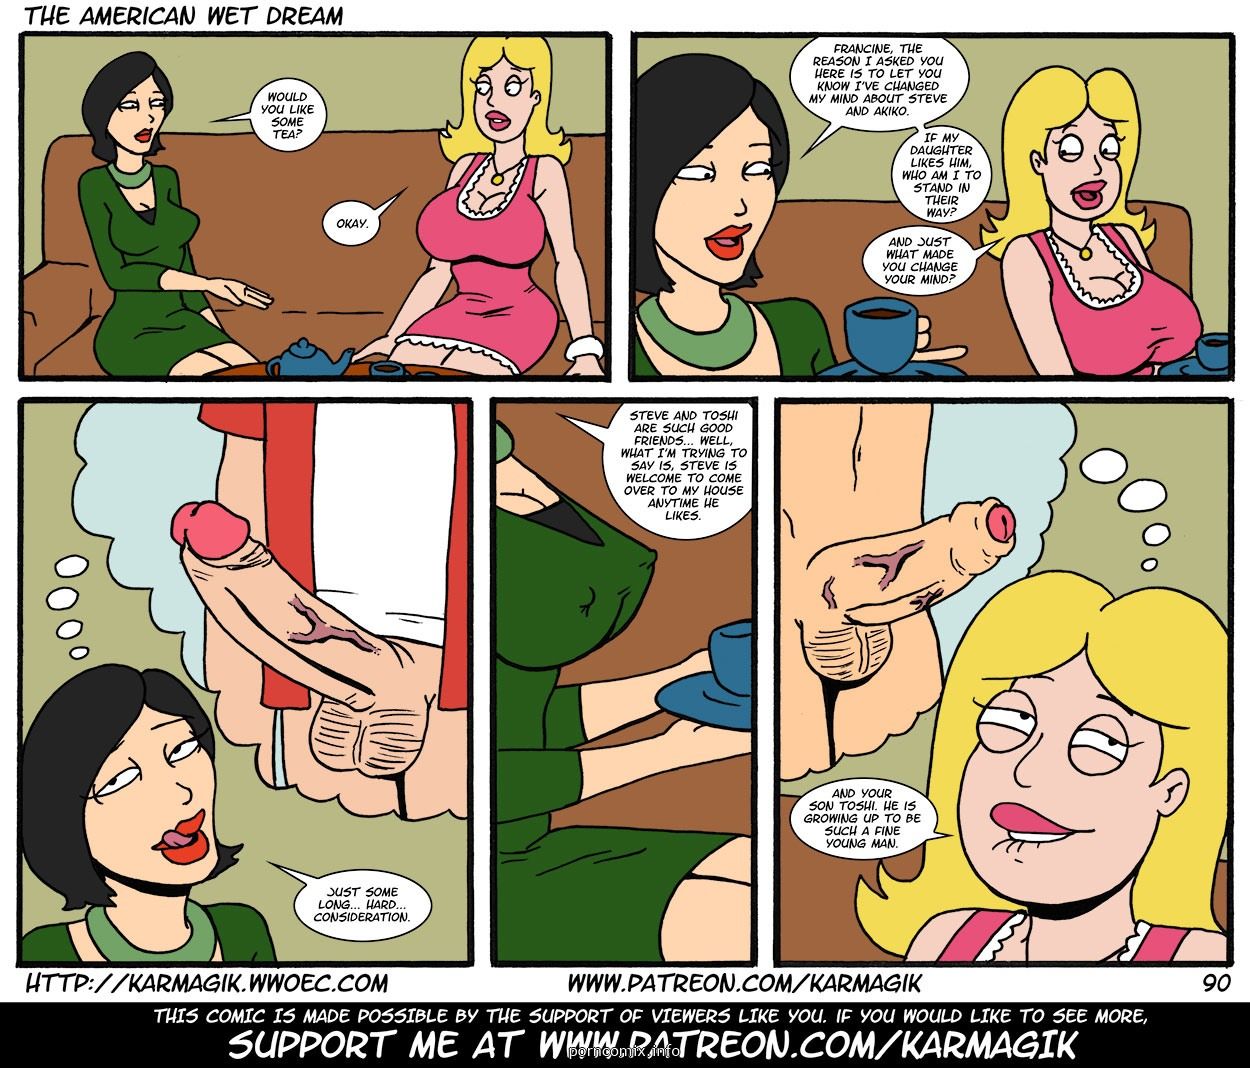 The American Wet Dream (American Dad) page 90